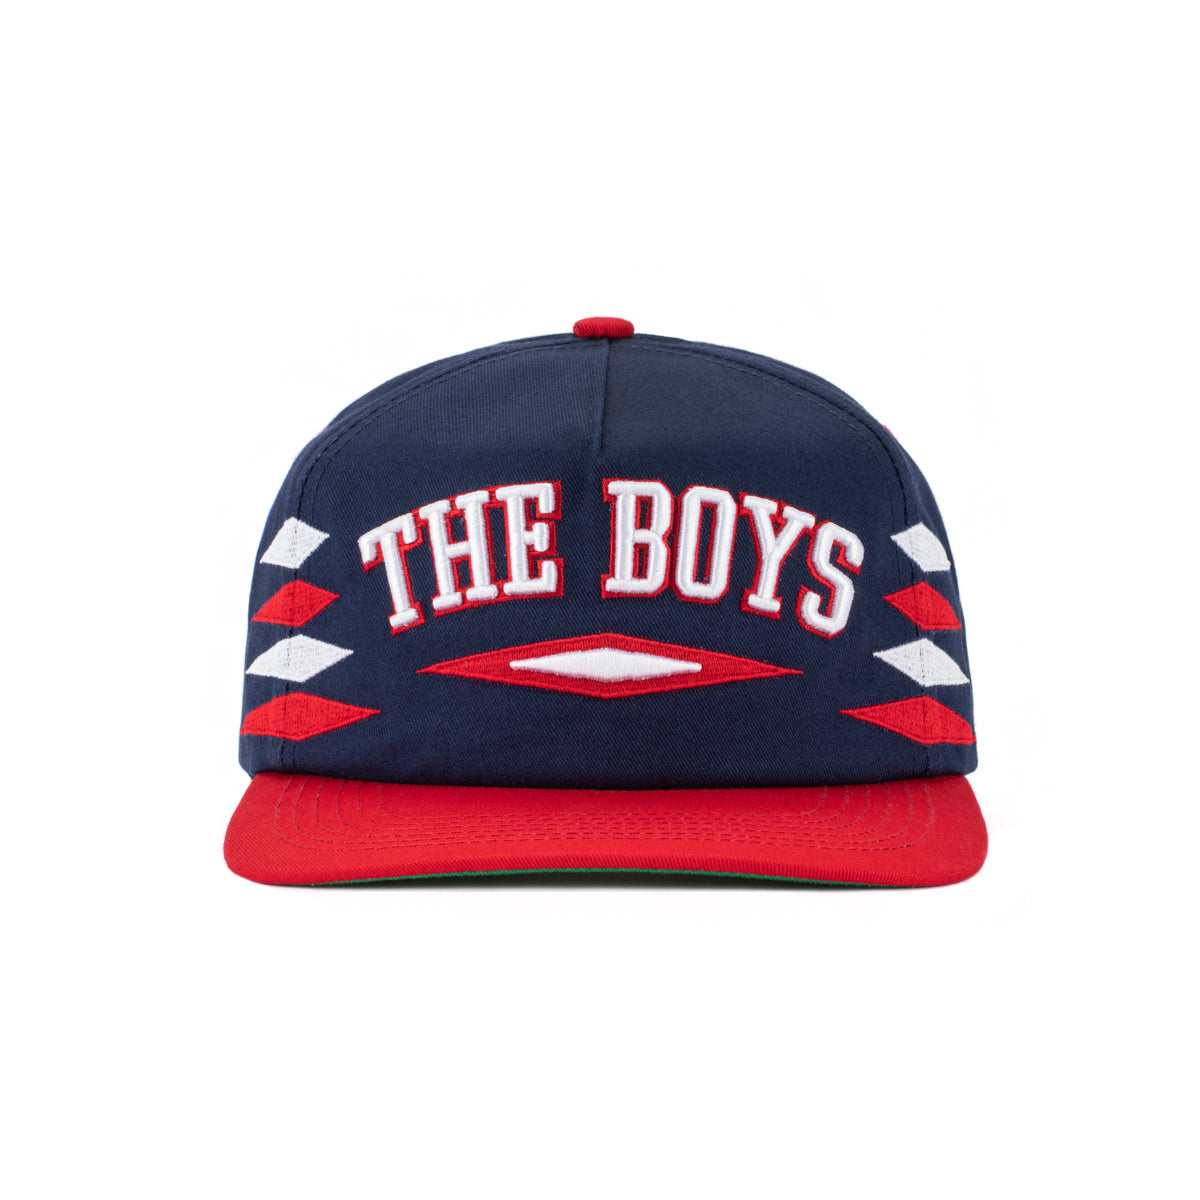 The Boys Diamond Retro Hat-Hats-Bussin With The Boys-Navy/Red-OS-Barstool Sports